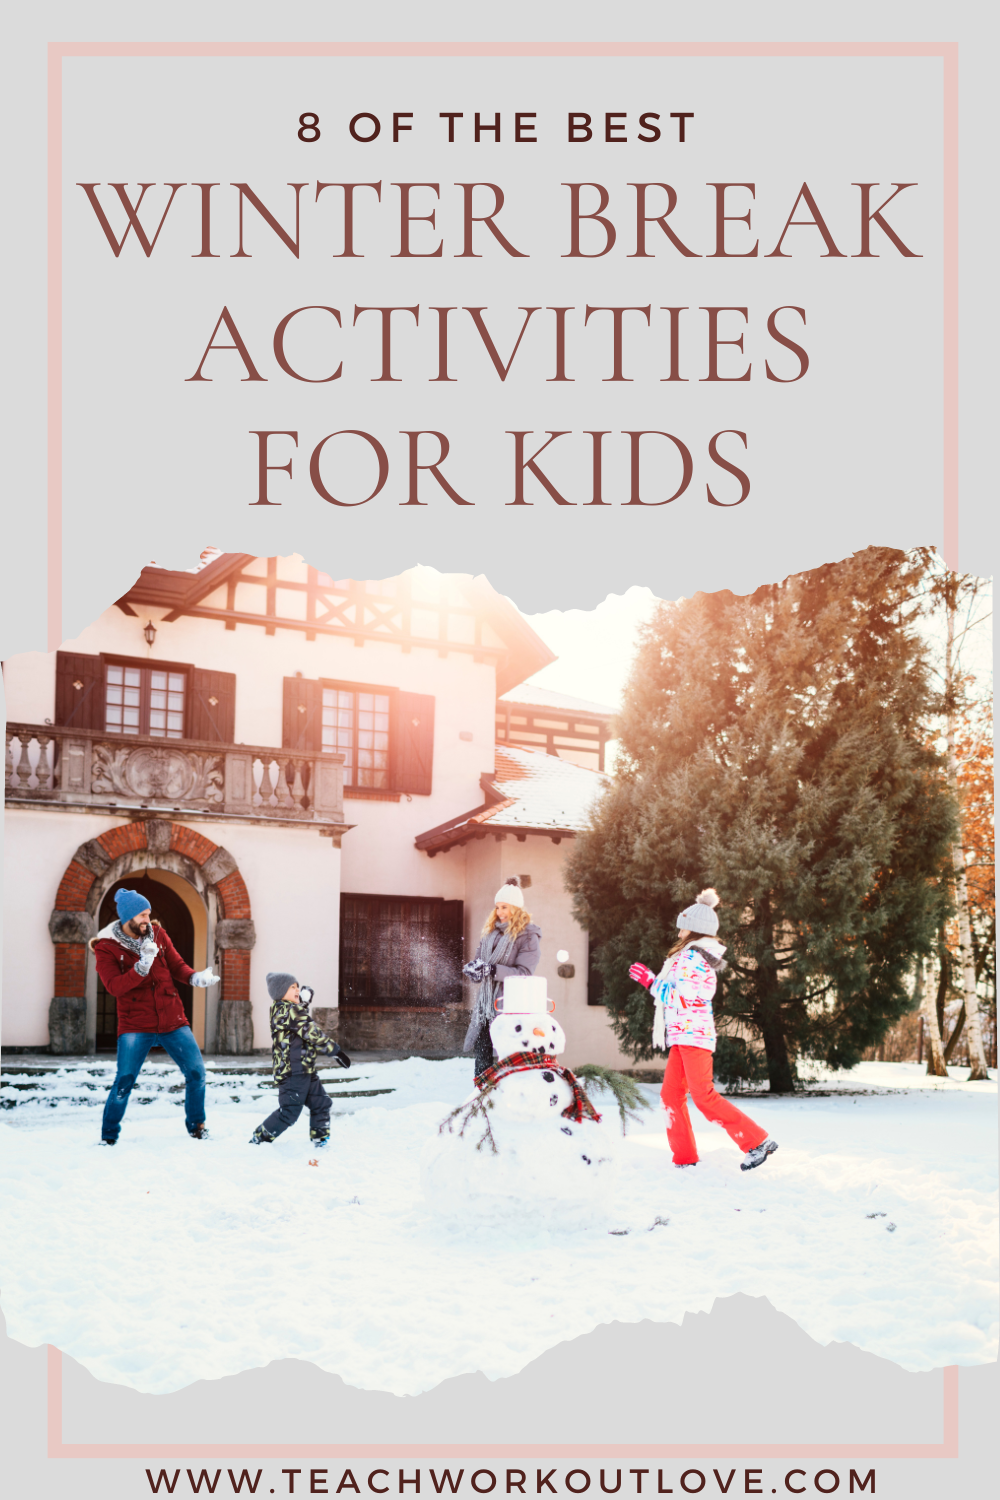 Having little ones home from school is always hectic, especially when the winter weather can make using up their energy so much harder. As parents, you know nothing is better to calm a busy little bee than keeping them engaged in an activity. Here are some ways to keep your kiddos entertained and give them a chance to have some winter bonding with you.